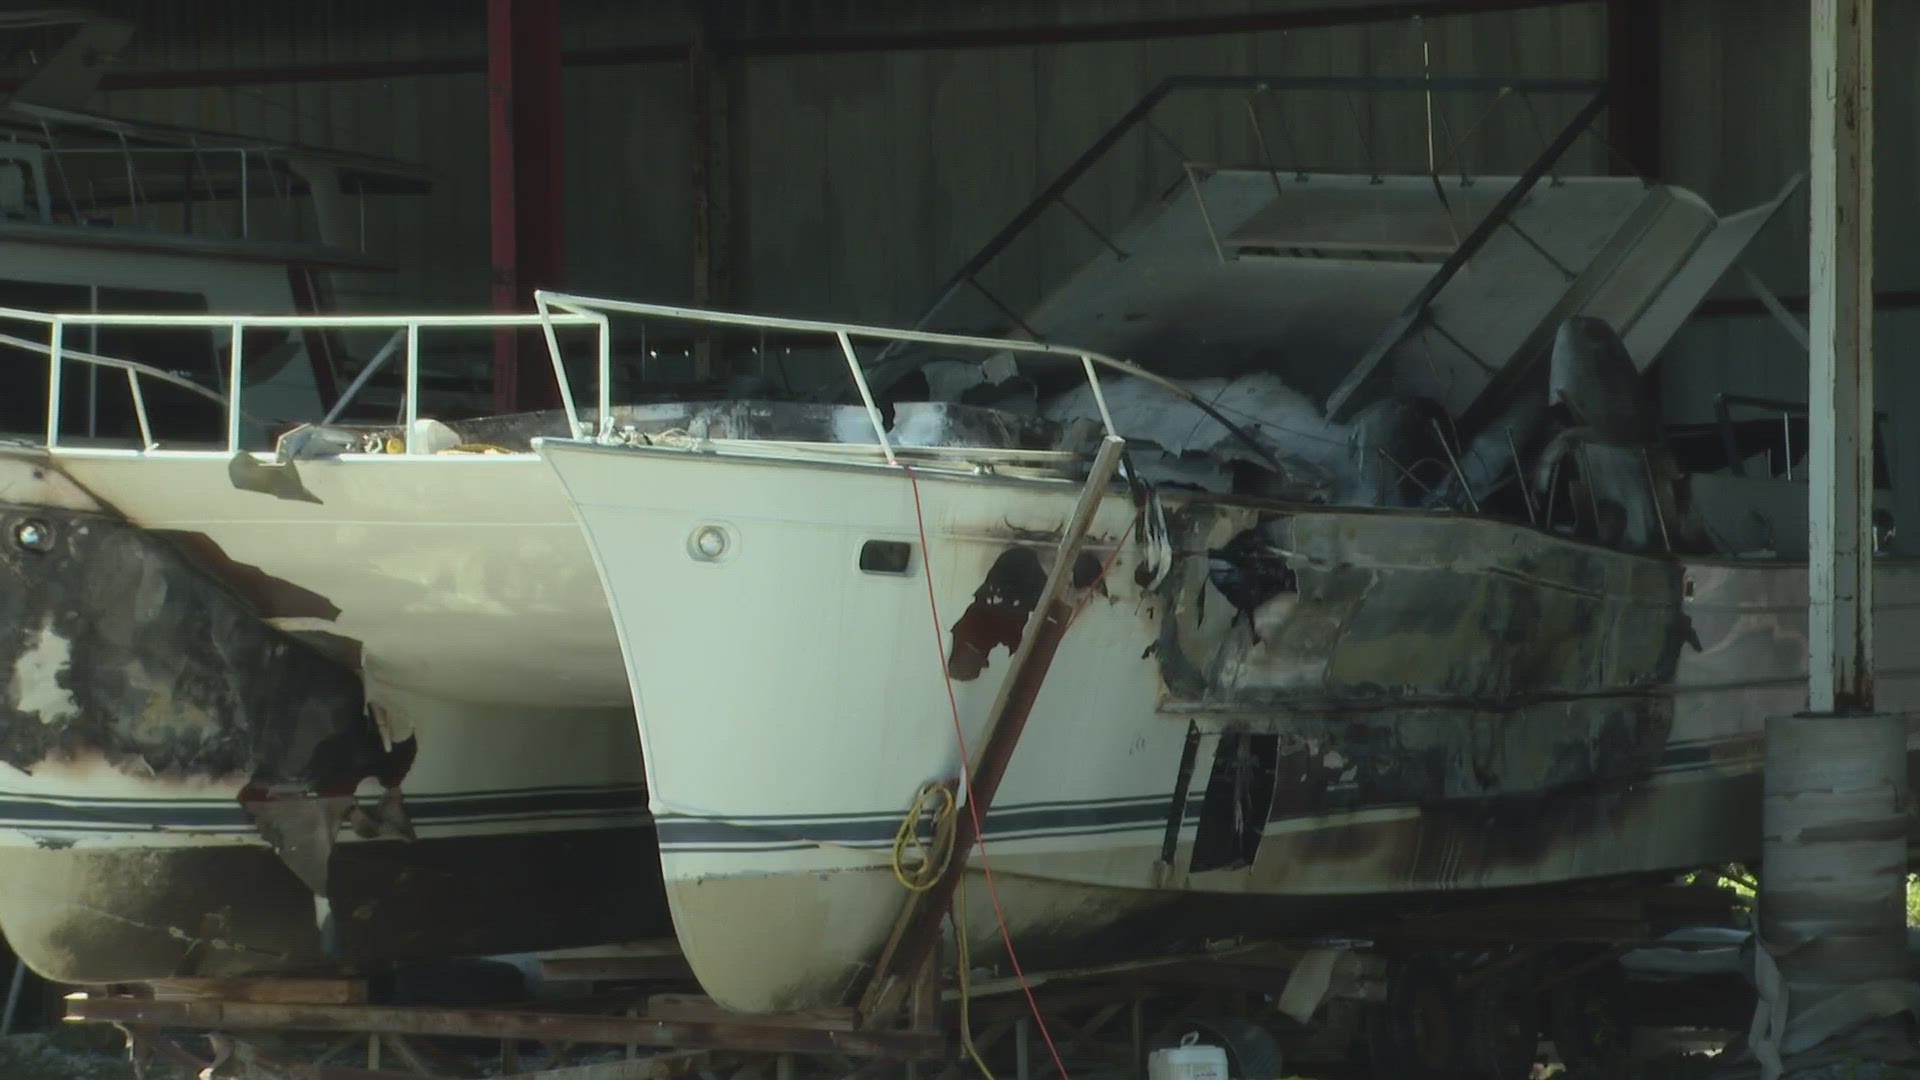 The boat had at least 200 gallons of fuel on board.